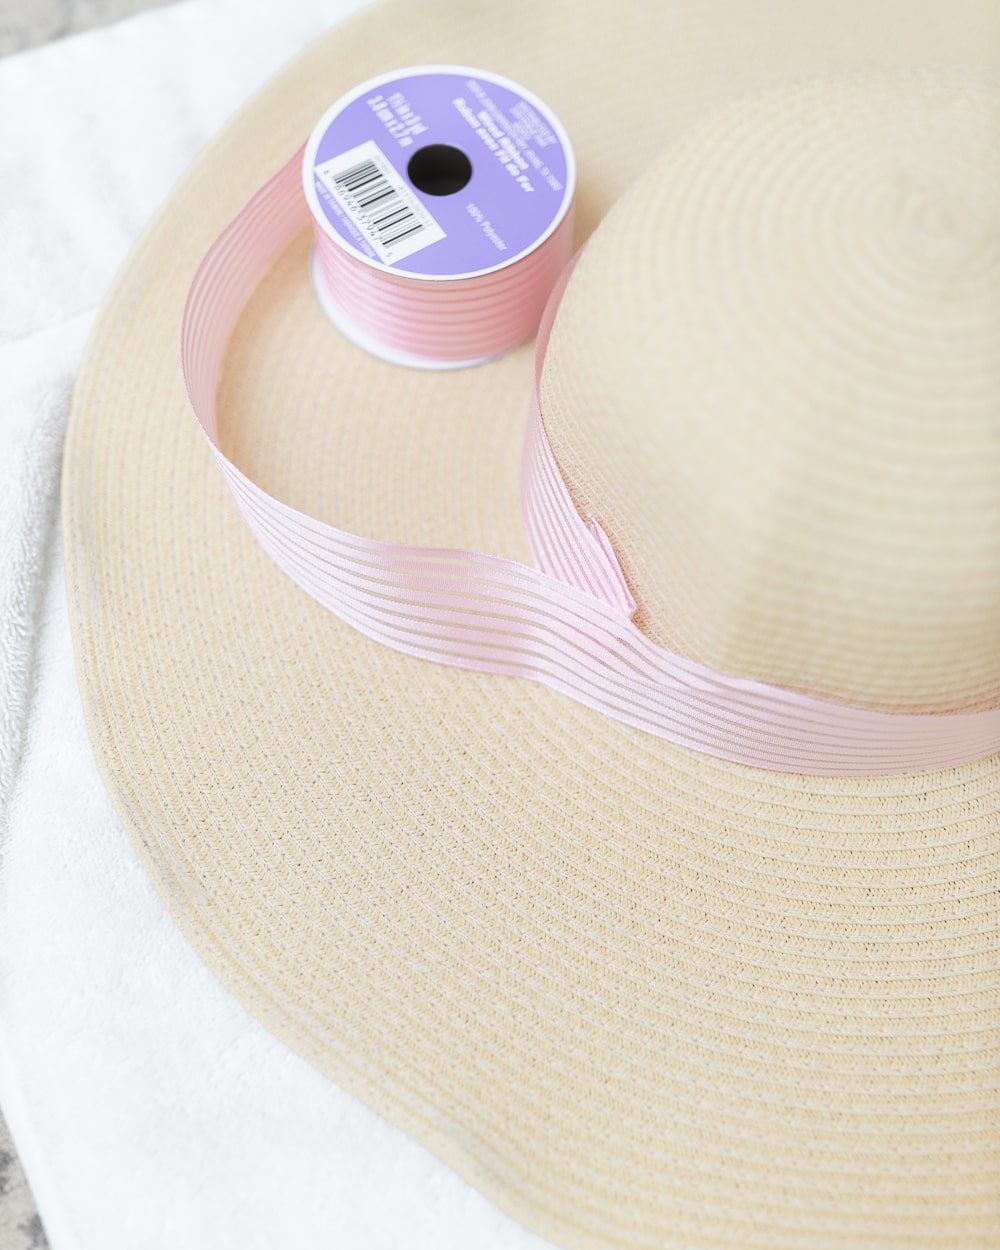 Kentucky Derby hat ribbon used by blogger Stephanie Ziajka on Diary of a Debutante